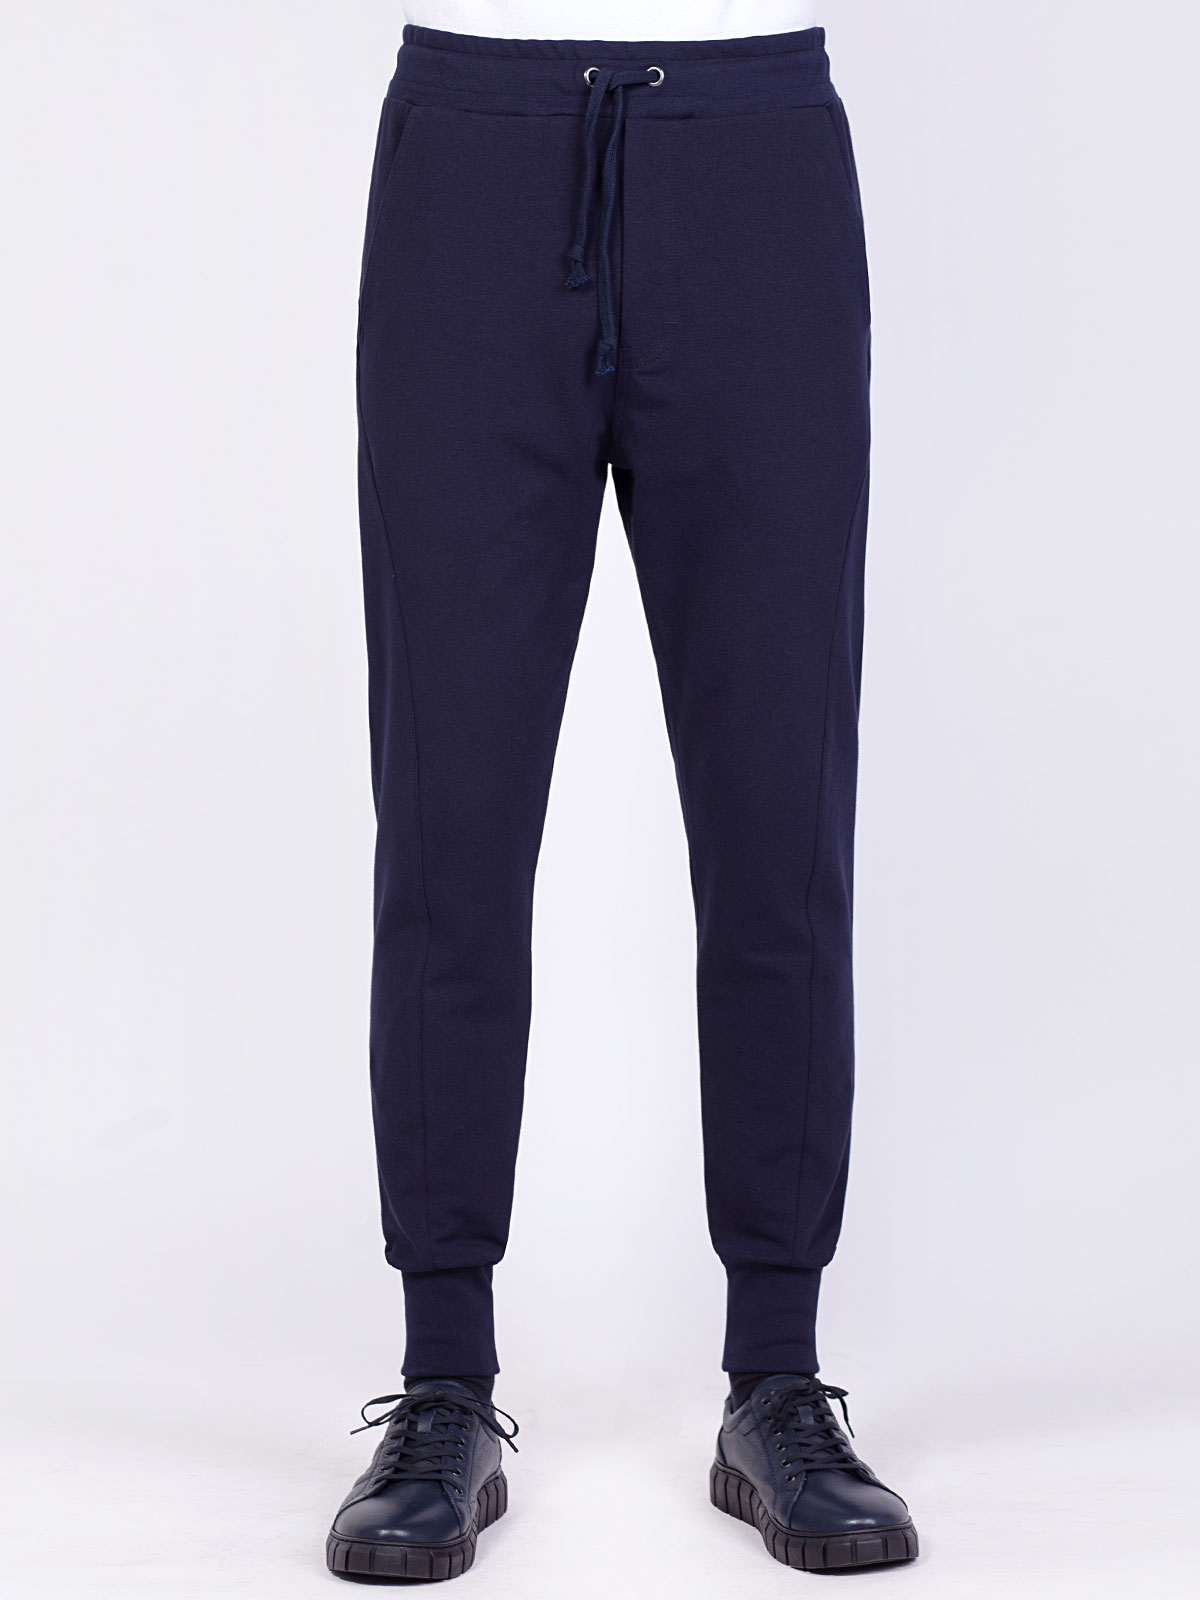 Sports pants with wide elastic - 63315 € 32.62 img3